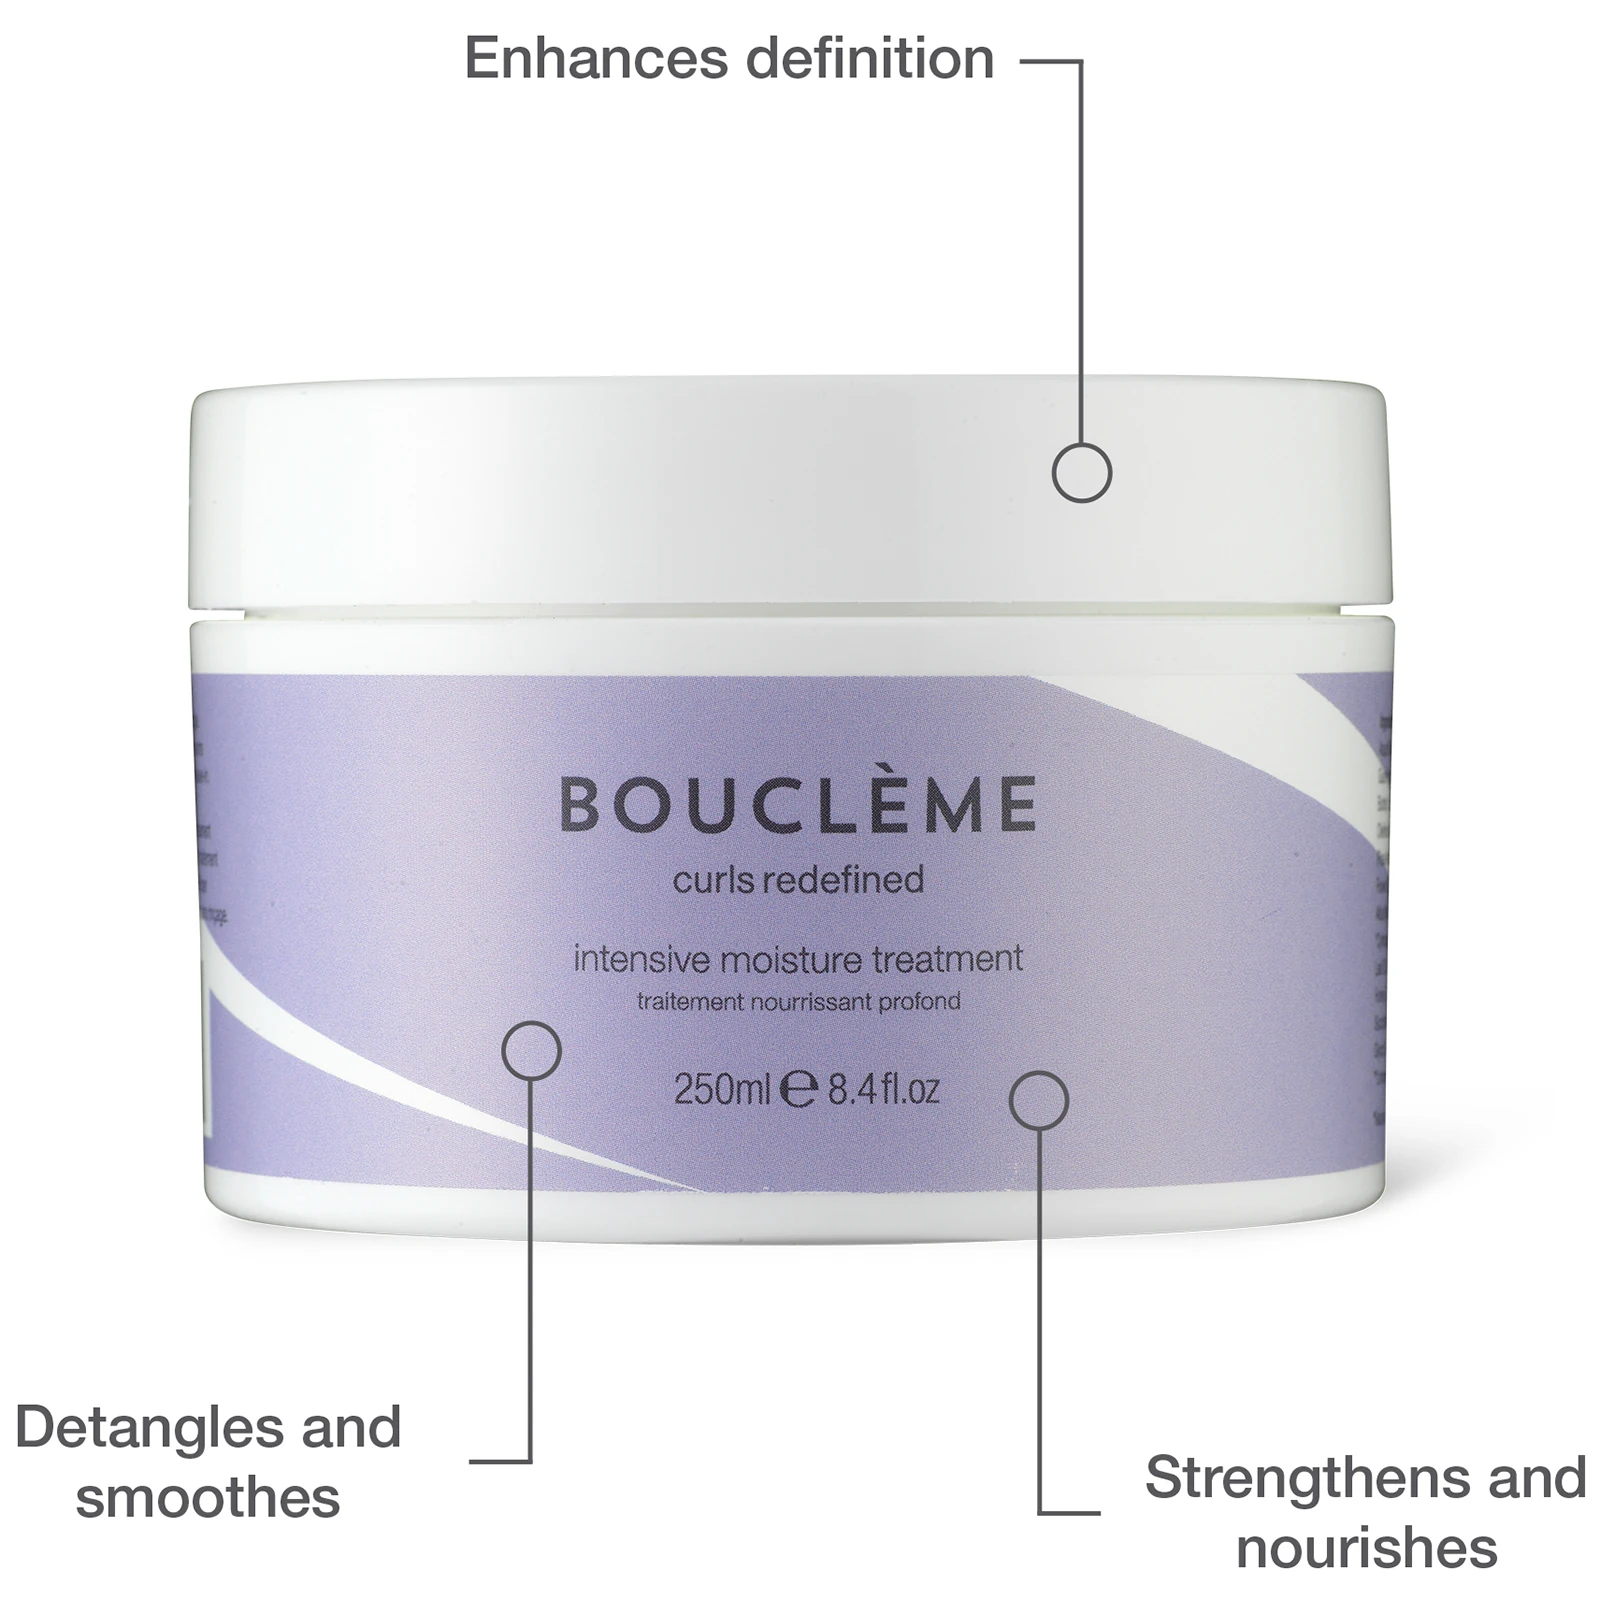 enhances definition, detangles and smoothes, strengthens and nourishes.